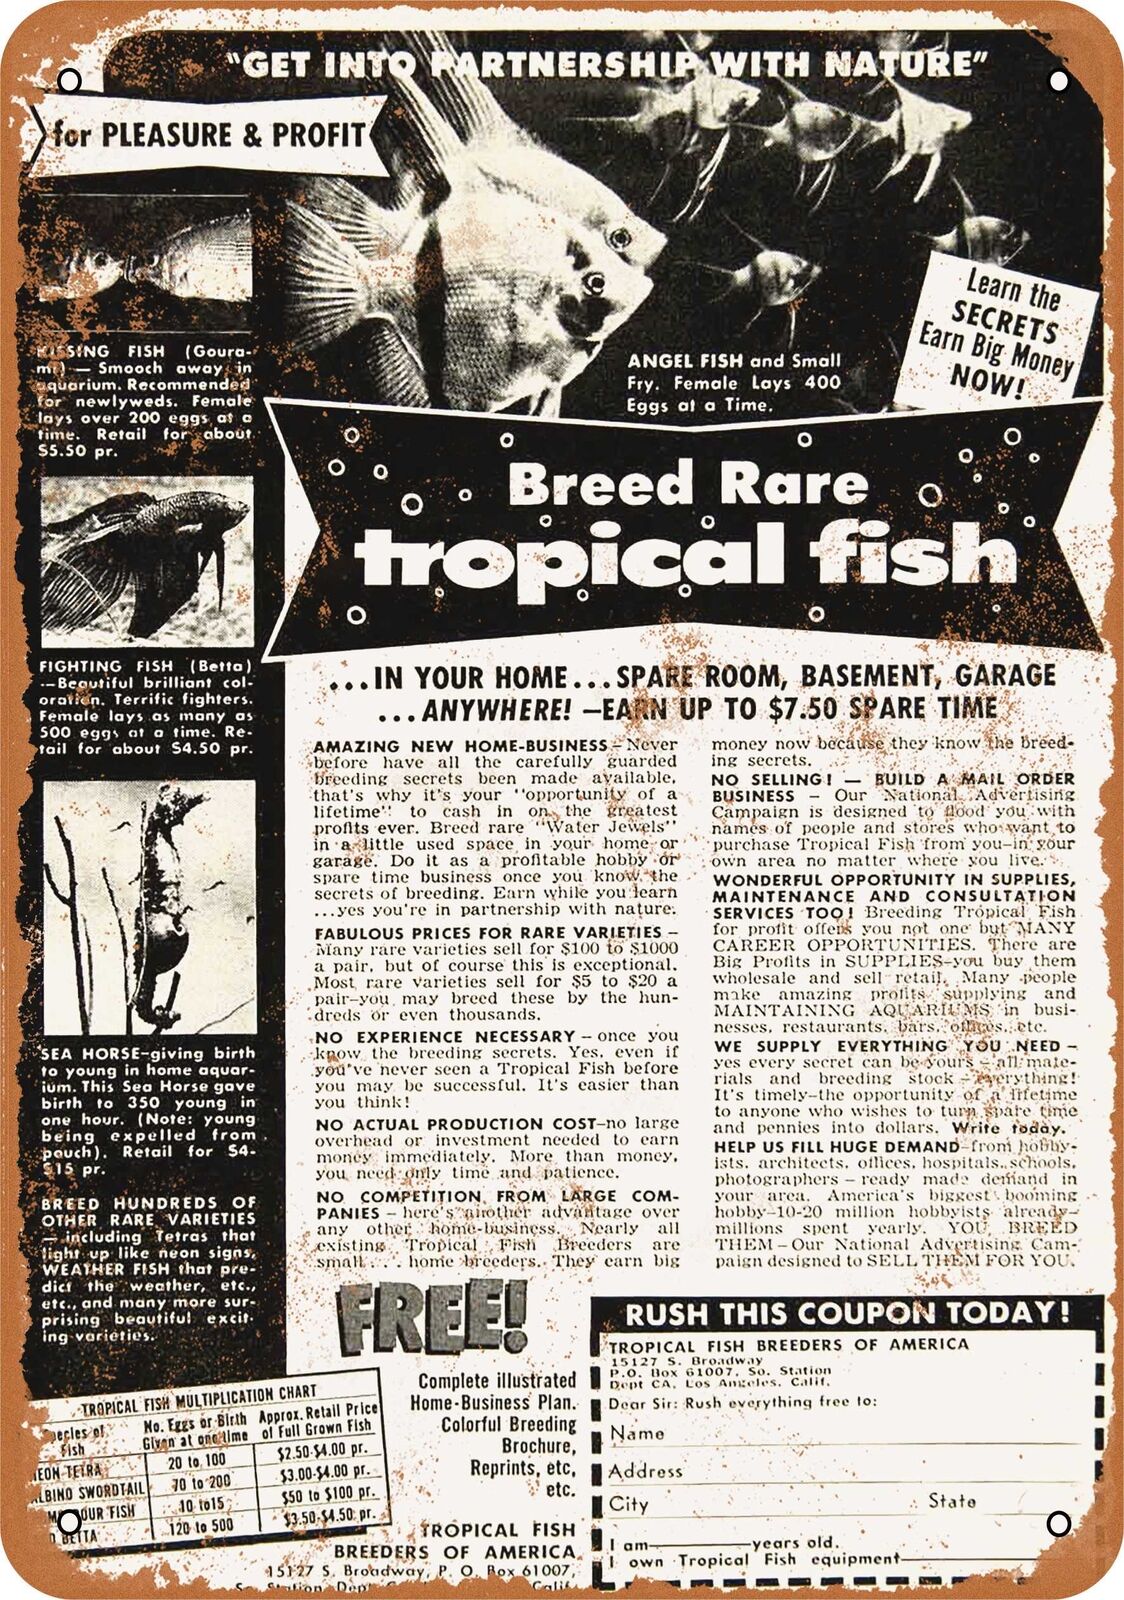 Metal Sign - 1953 Breed Rare Tropical Fish - Vintage Look Reproduction